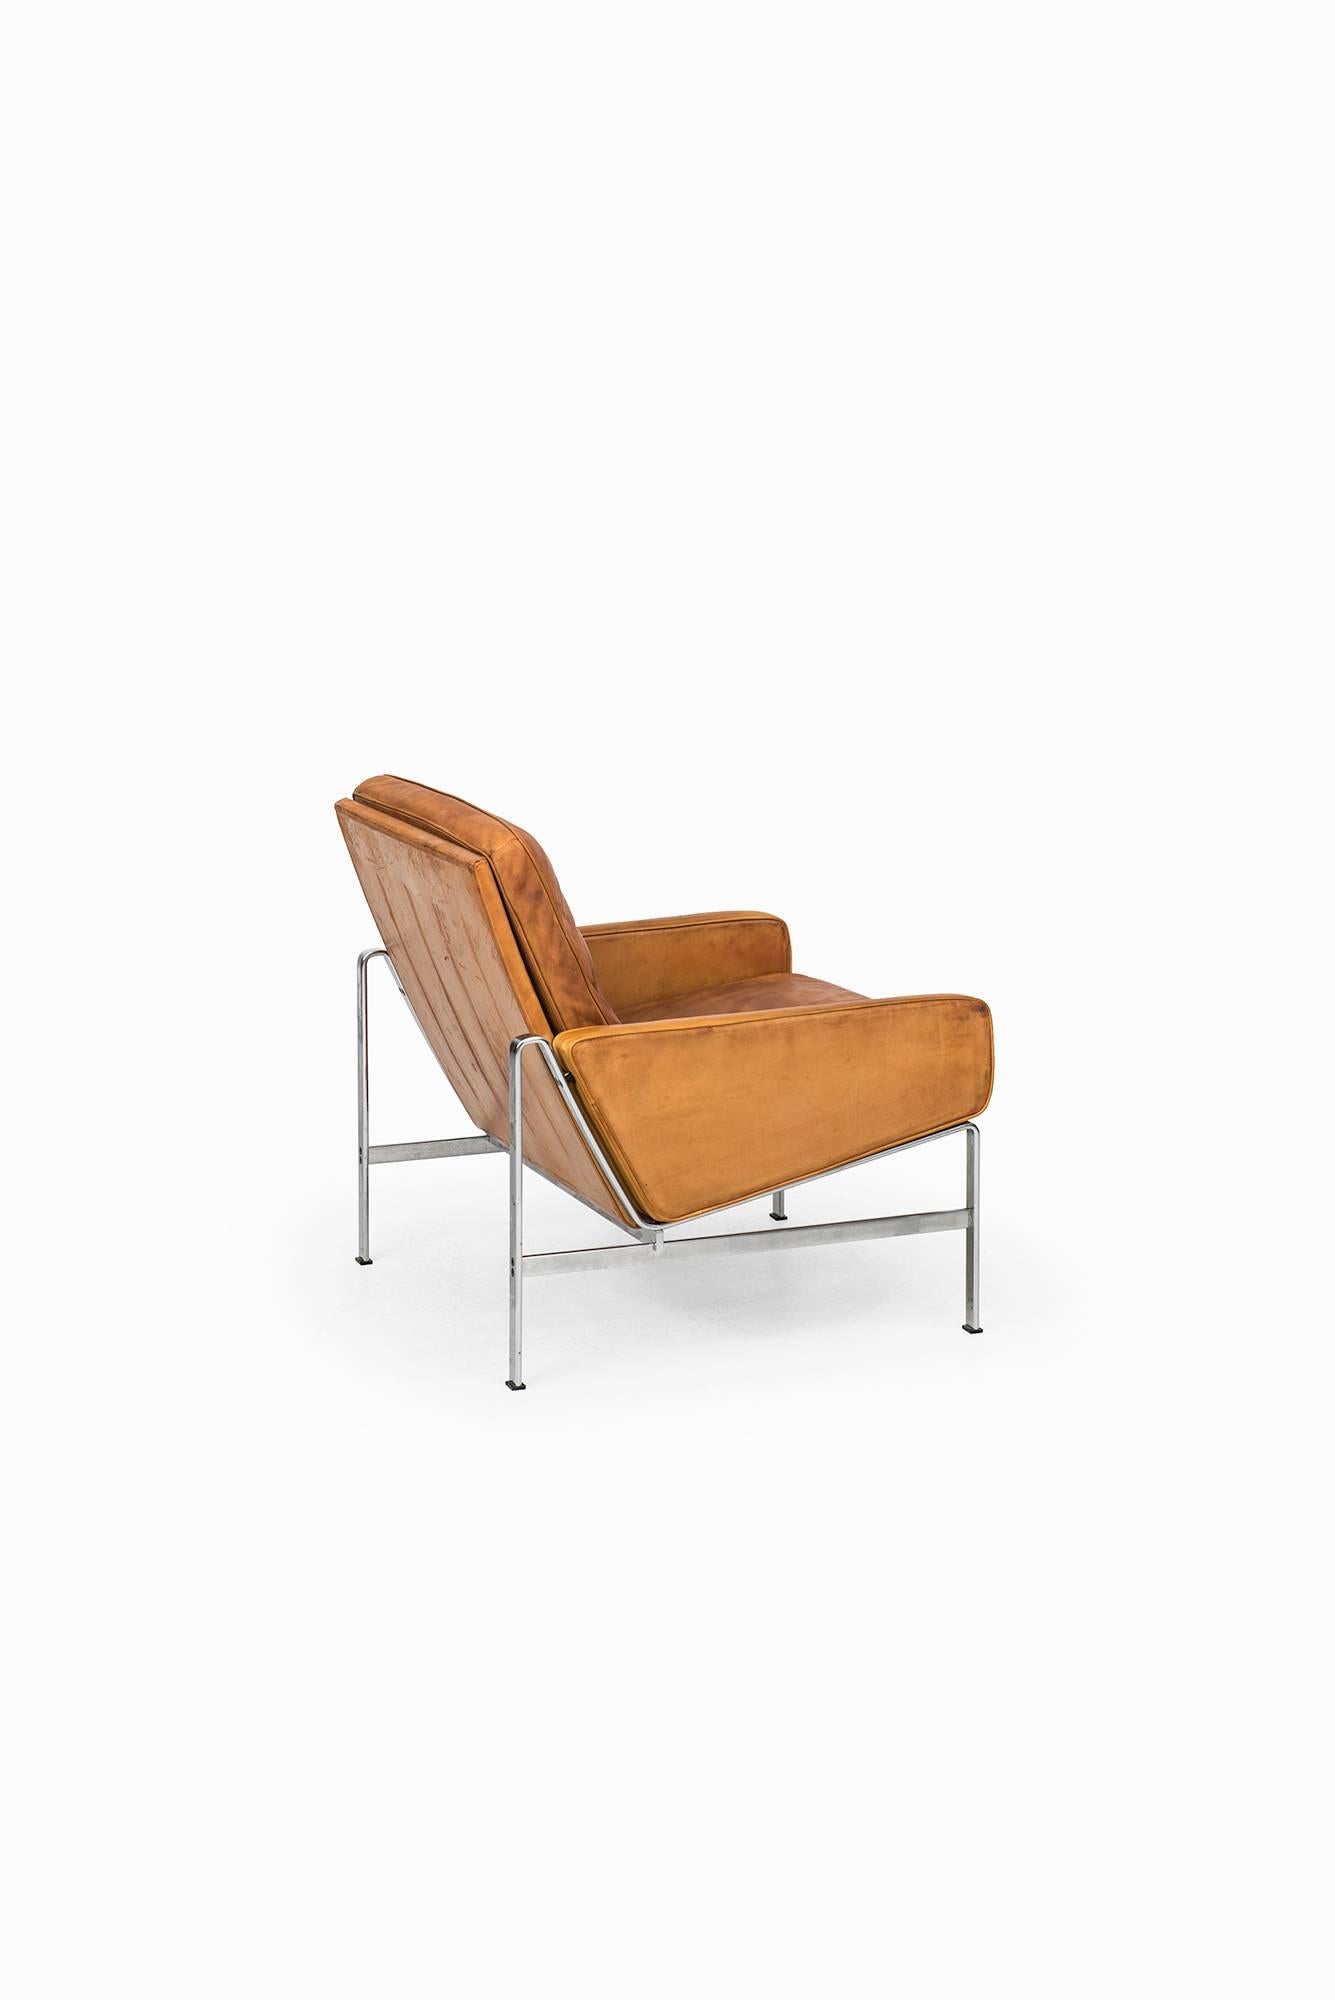 Rare easy chair model FK6720 designed by Preben Fabricius and Jørgen Kastholm. Produced by Kill International in Denmark.